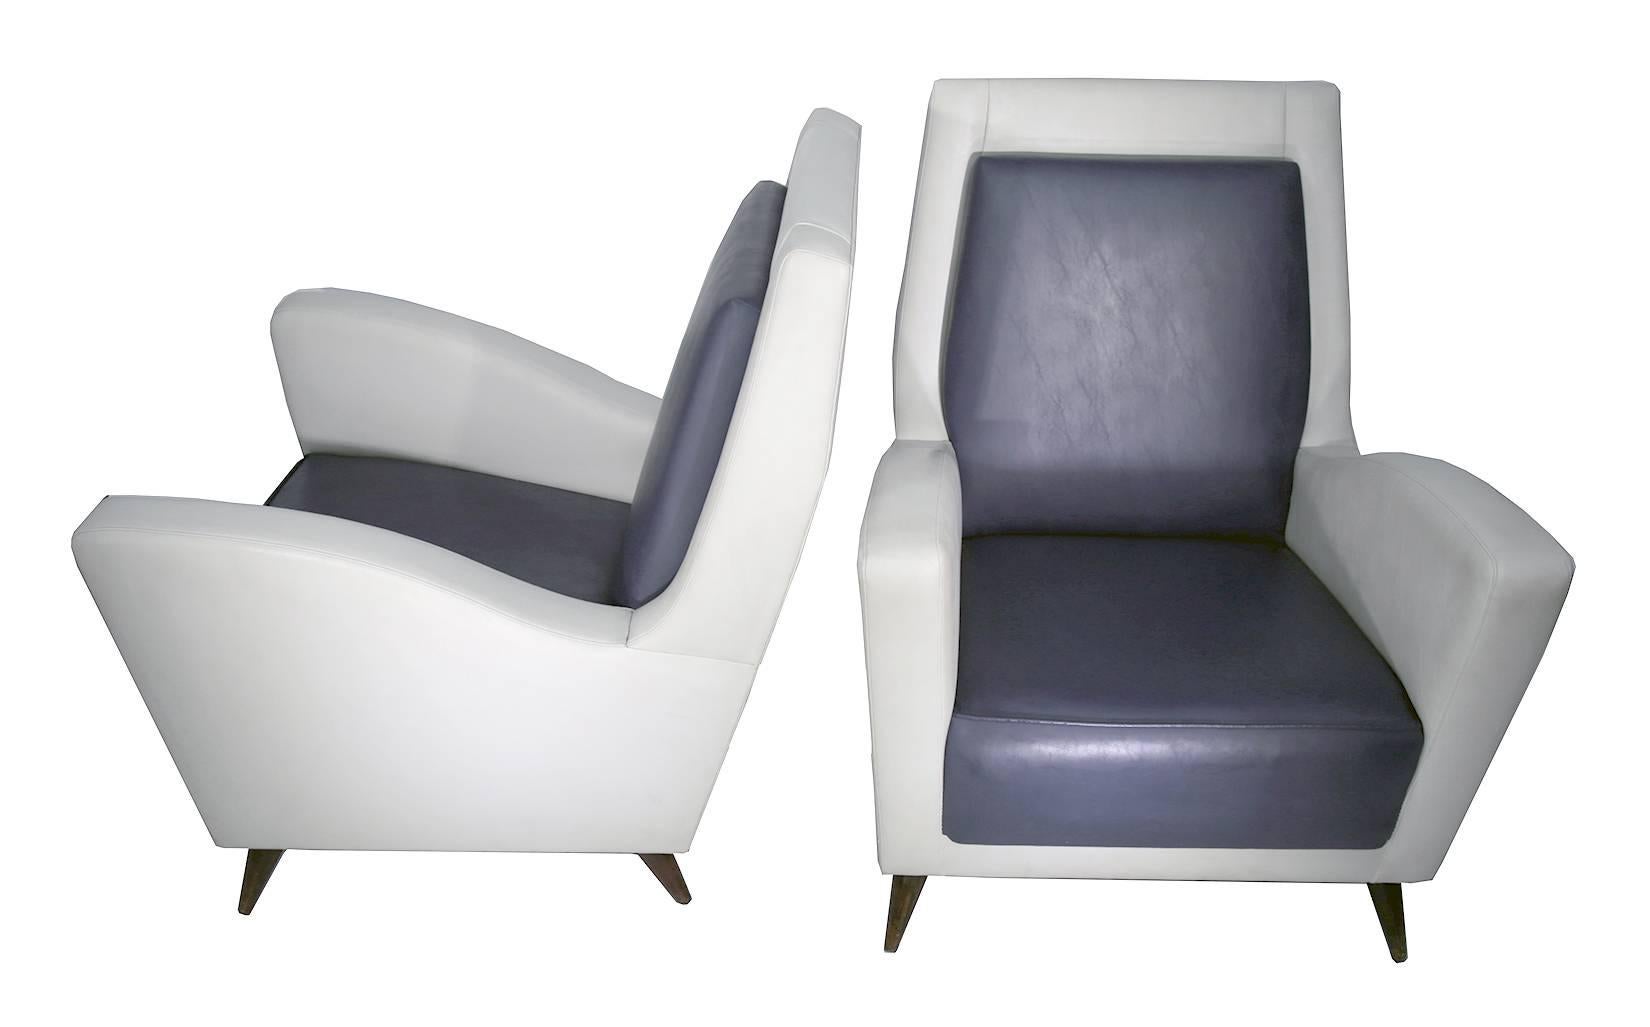 Pair of 1950s Italian contrasting blue and white leather club chairs in the style of Gio Ponti. Colors and style reminiscent of the decor at the hotel Parco Dei Principi designed by G.Ponti in Sorrento, Italy.